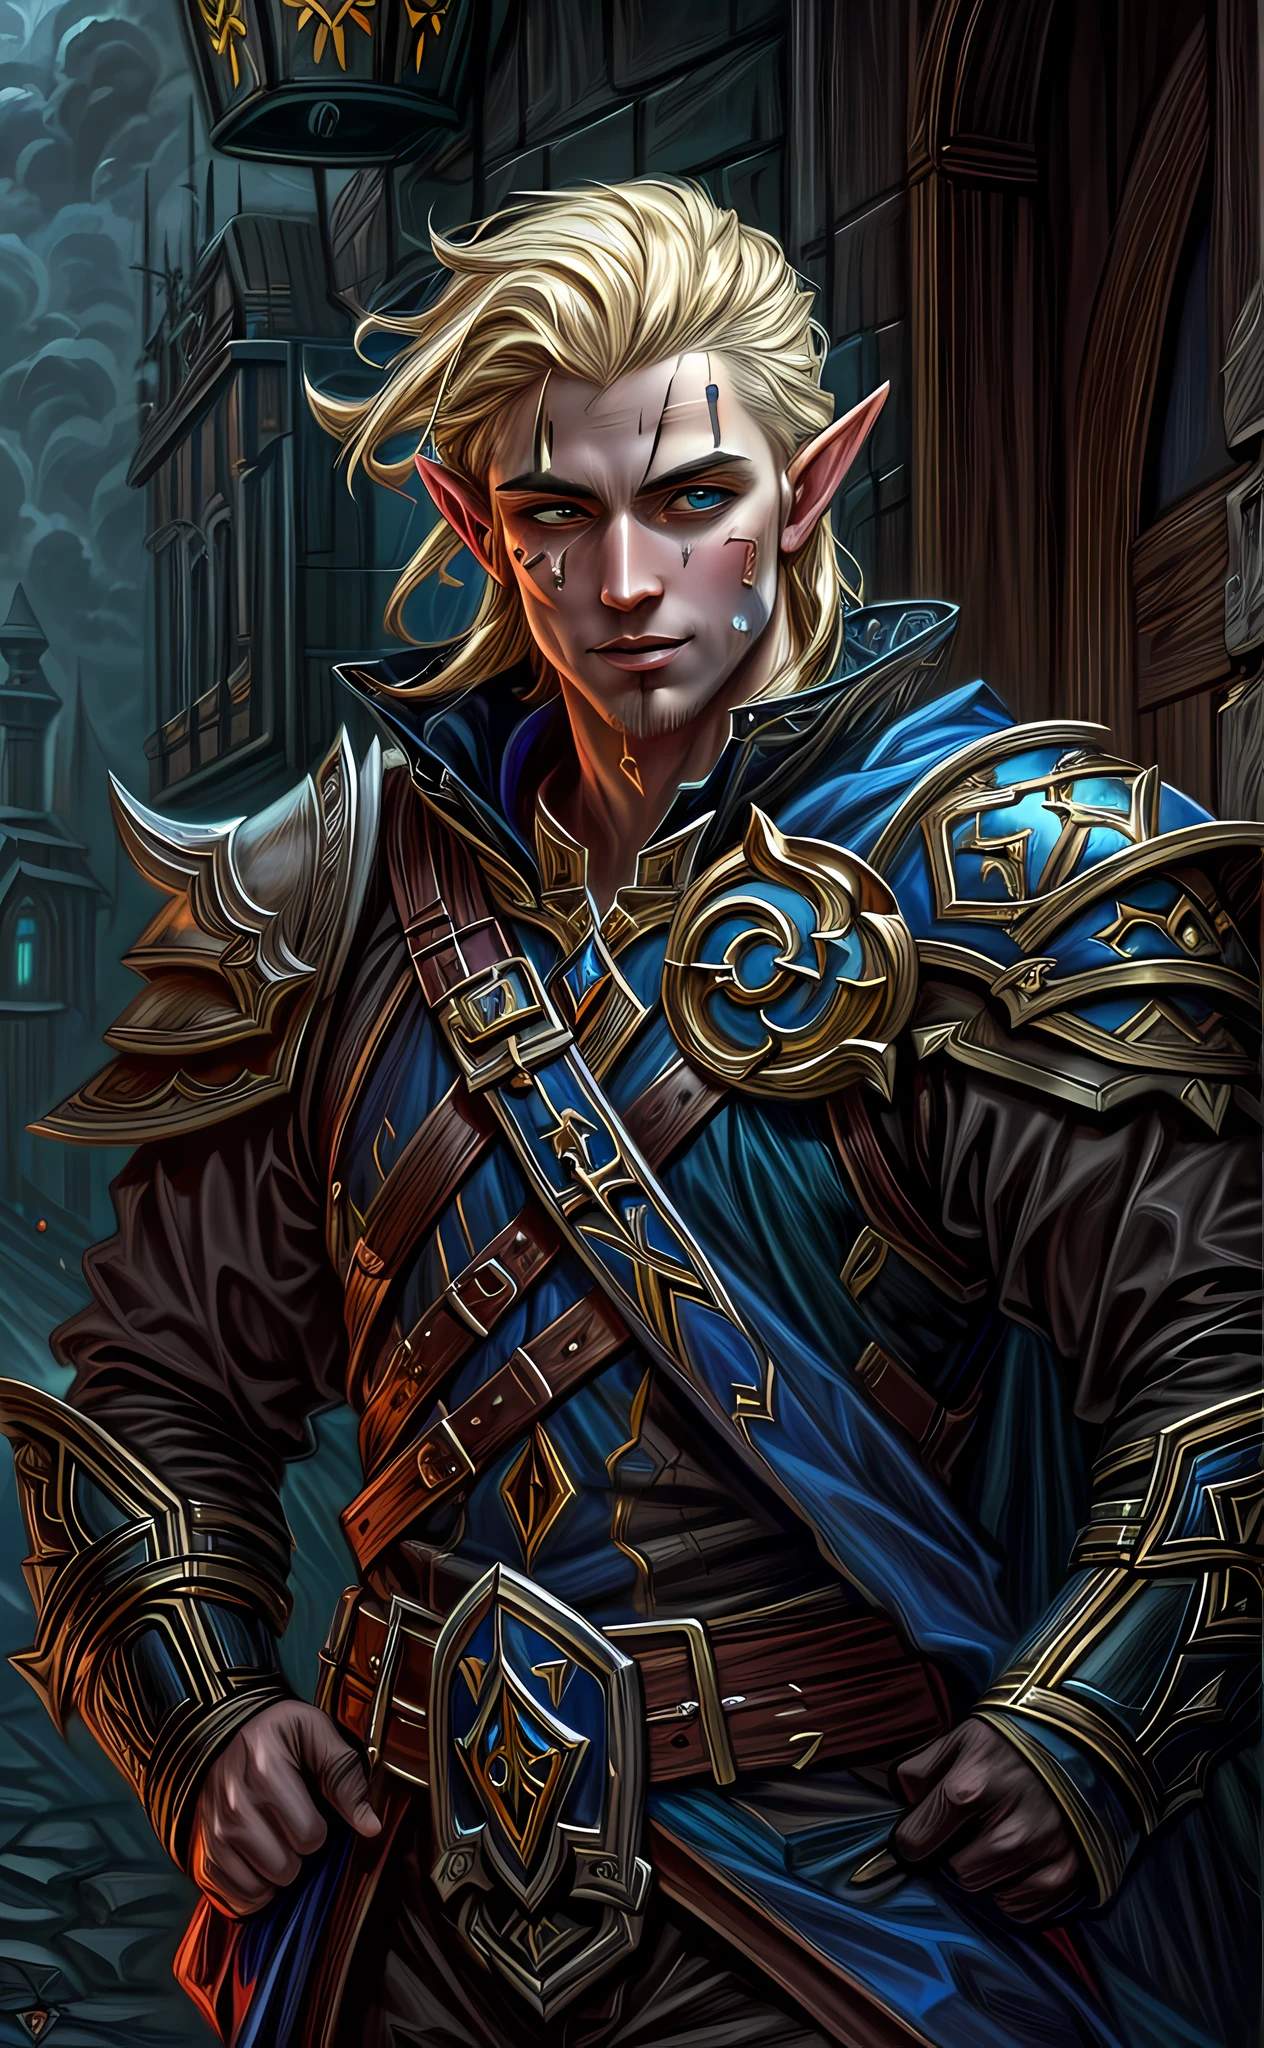 dark fantasy art, dnd art, dark RPG art, wide shot, (masterpiece:1.3), magv1ll, half elf bard in a fantasy street, full body, intense details, highly detailed, photorealistic, best quality, highres, portrait of 1(male: 1.4) half elf (fantasy art, Masterpiece, best quality: 1half elf, male, thin, pale skin, (dirt on face: 1.2), intense details facial detail (gritty fantasy art, Masterpiece, best quality: 1.4) bard, exquisite beauty, (blond hair: 1.3), (smirking in arrogance: 1.2), (dirt on face: 1.3), (grime on face: 1.3) (small pointed ears: 1.3), intense azure eyeantasy art, Masterpiece, best quality: 1.3) holding a (small lyre: 1.4) (fantasy art, Masterpiece, best quality: 1.4) wearing heavy (heavy armor, wearing) CM-Beautiful_armor, wearing leather boots, wearing a cloak, a sword slung on his back (fantasy art, Masterpiece, best quality: 1.3), smiling an arrogant smile, standing in gritty fantasy street, there are (dark red clouds: 1.3) , (dark yellows clouds: 1.3) above, sense of gloom, sense of dread, depth of field, reflection light, high details, best quality, 16k, [ultra detailed], masterpiece, best quality, (extremely detailed), dynamic angle, ultra wide shot, photorealistic, RAW, fantasy art, dnd art, fantasy art, realistic art